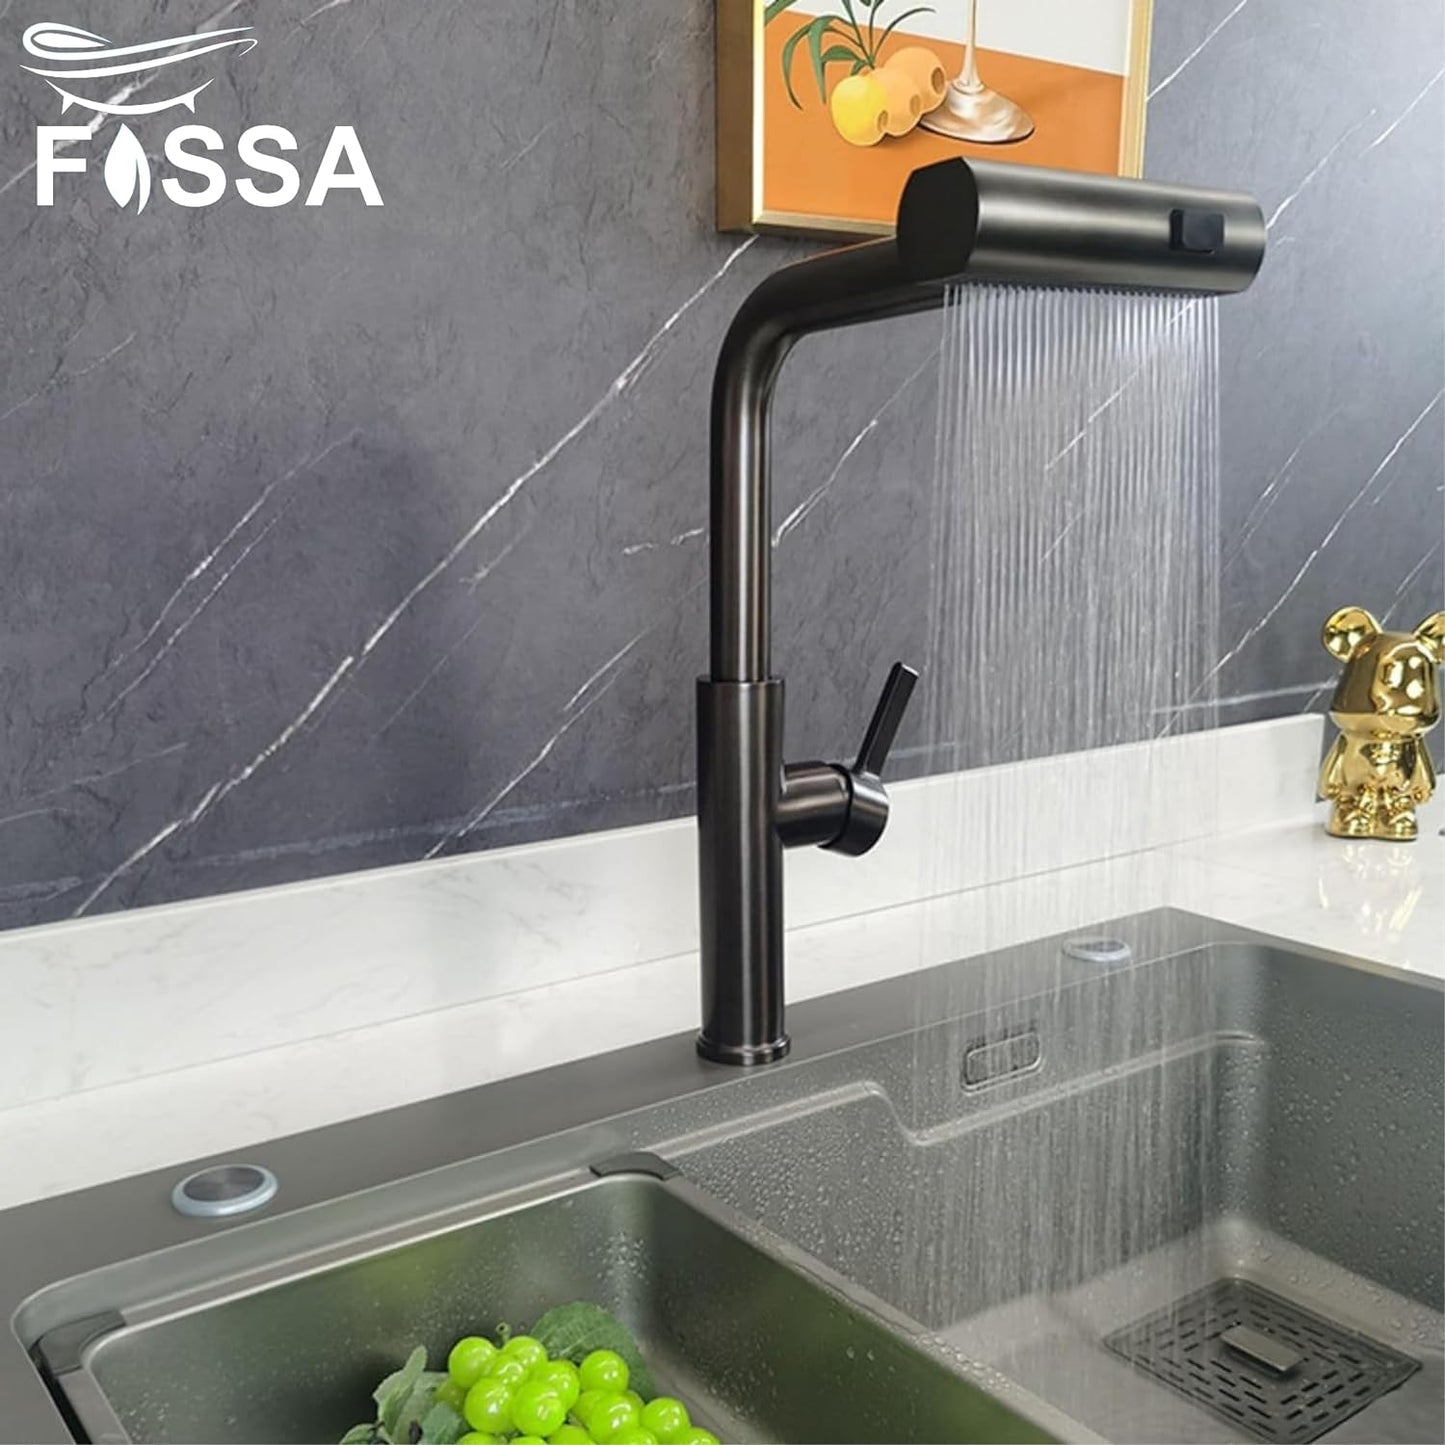 Fossa Pull-Out Kitchen Faucet, Stainless Steel Sink Faucet, Single Lever Rainfall Waterfall Faucet for Sinks, Black Fossa Home